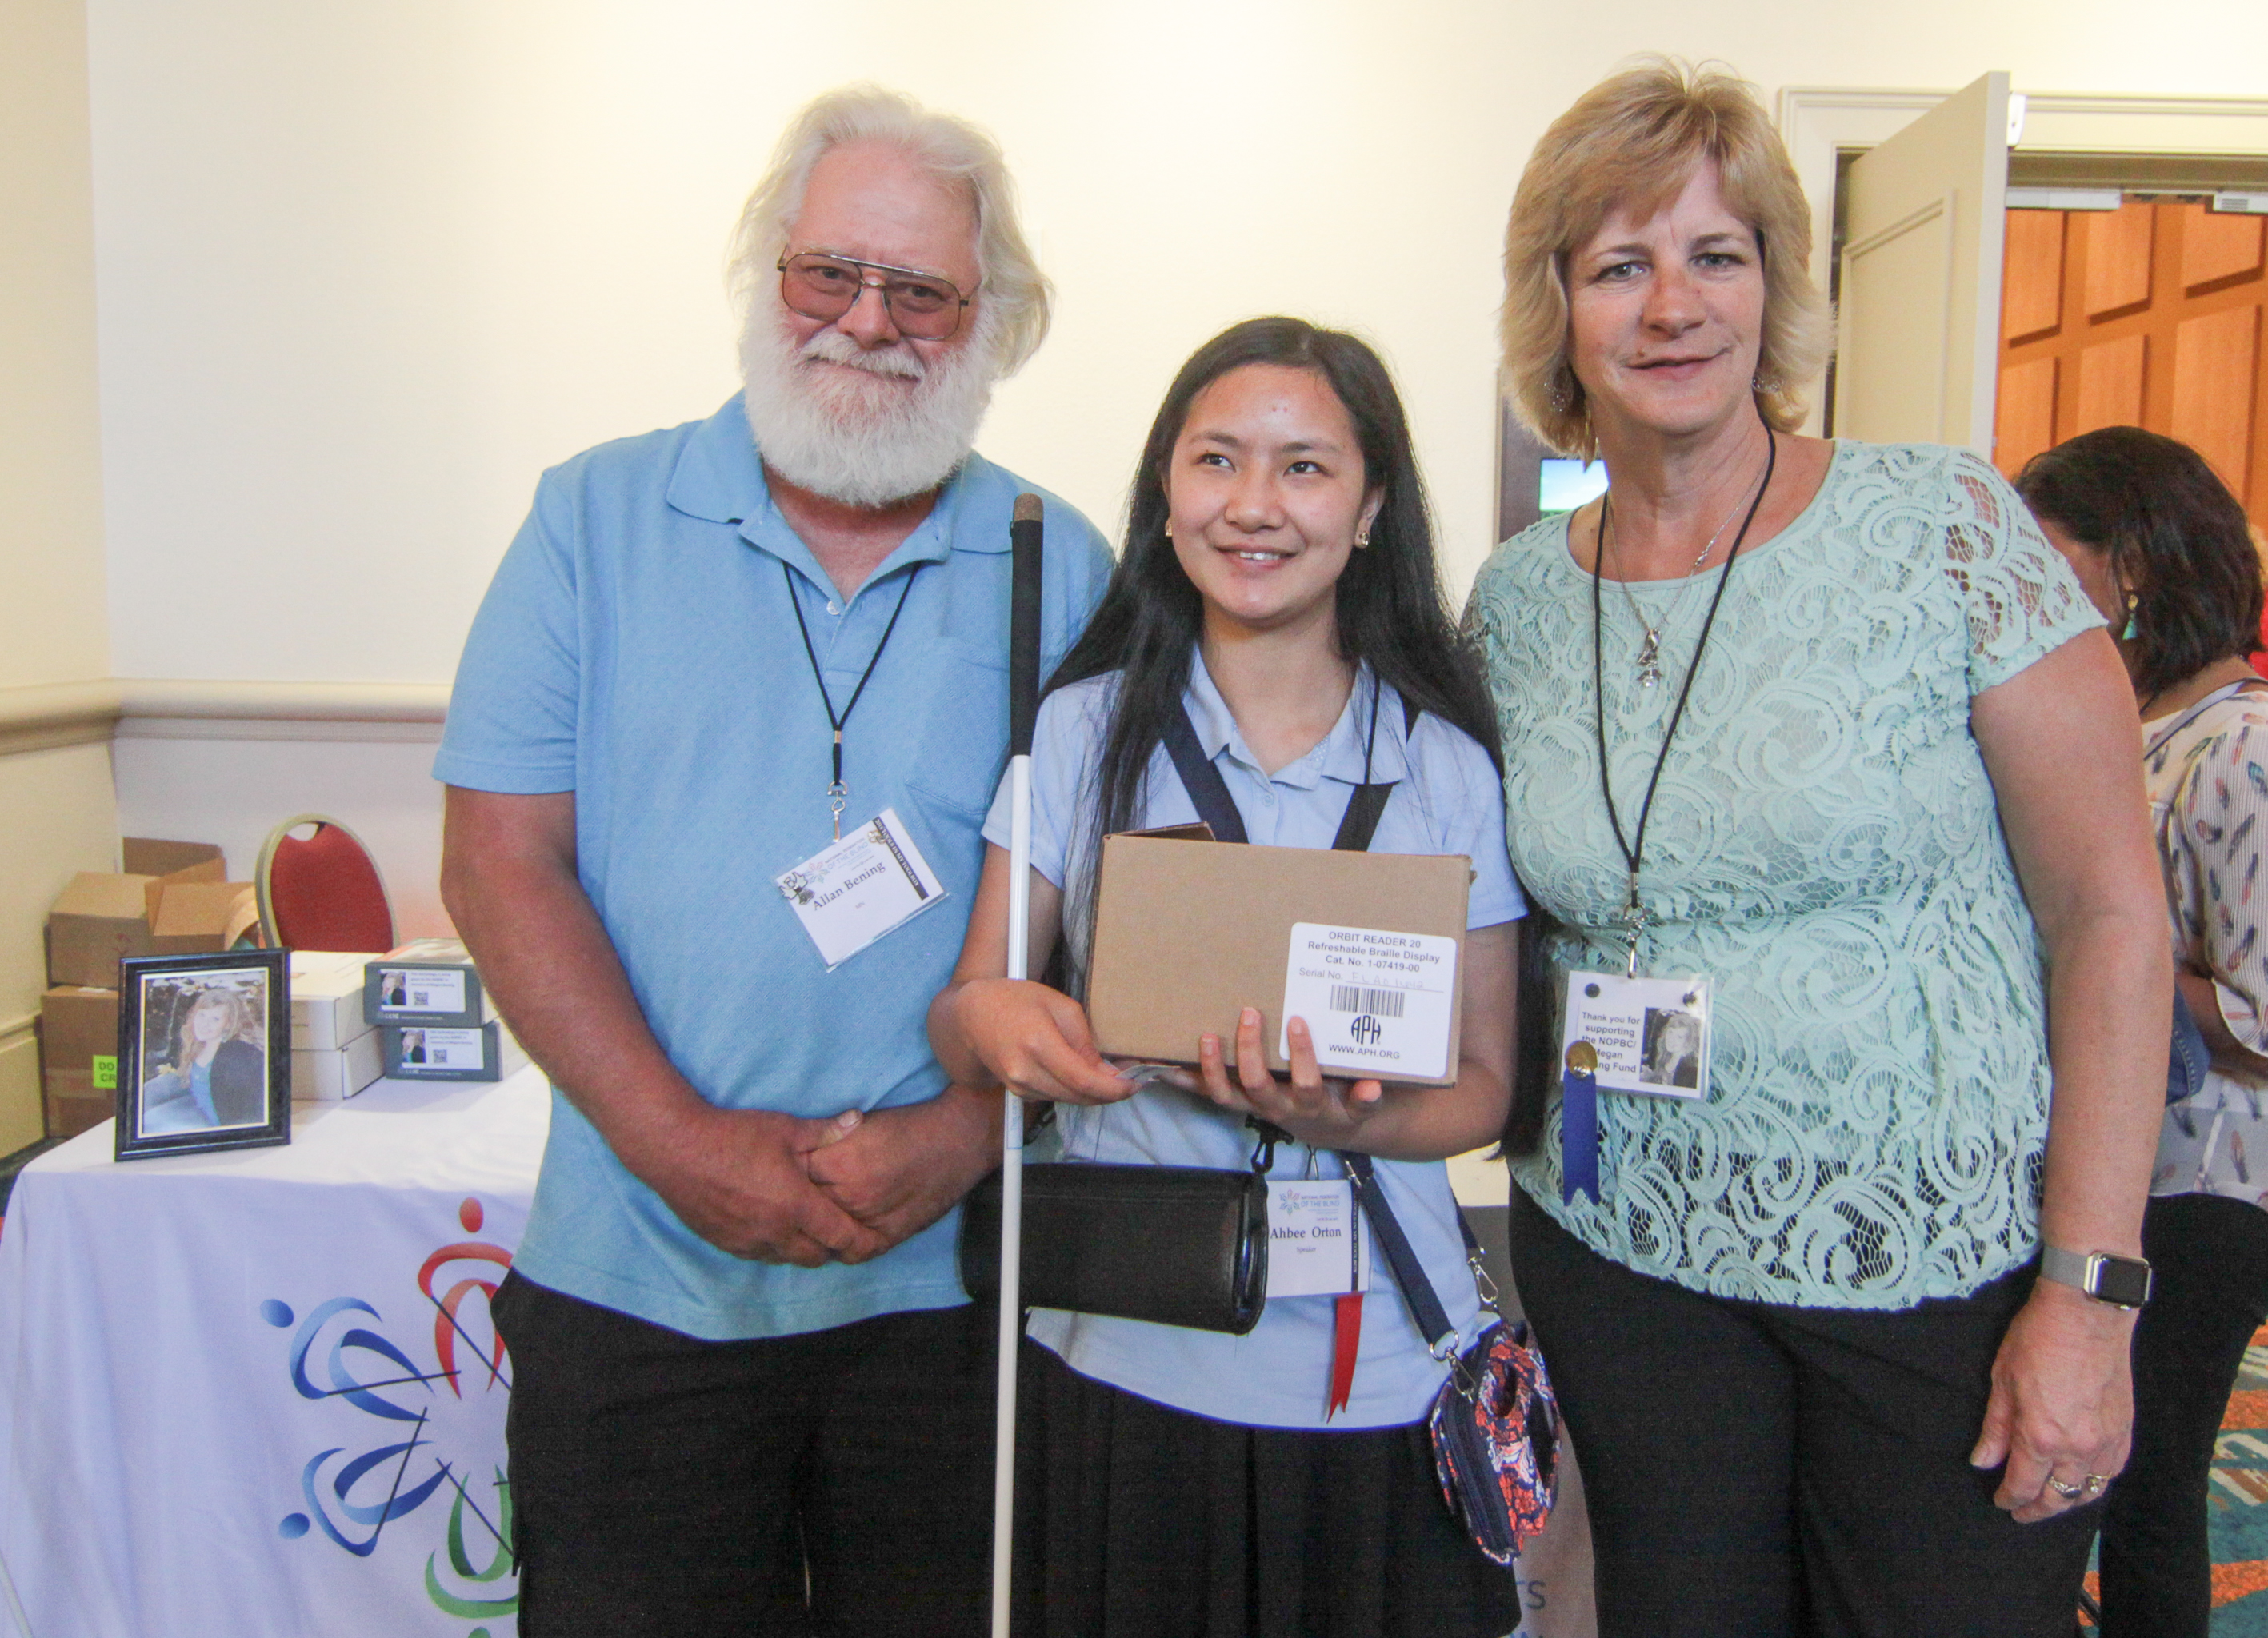 Jean and Allan Bening stand with Ahbee Orton, who holds her new Orbit Reader 20.